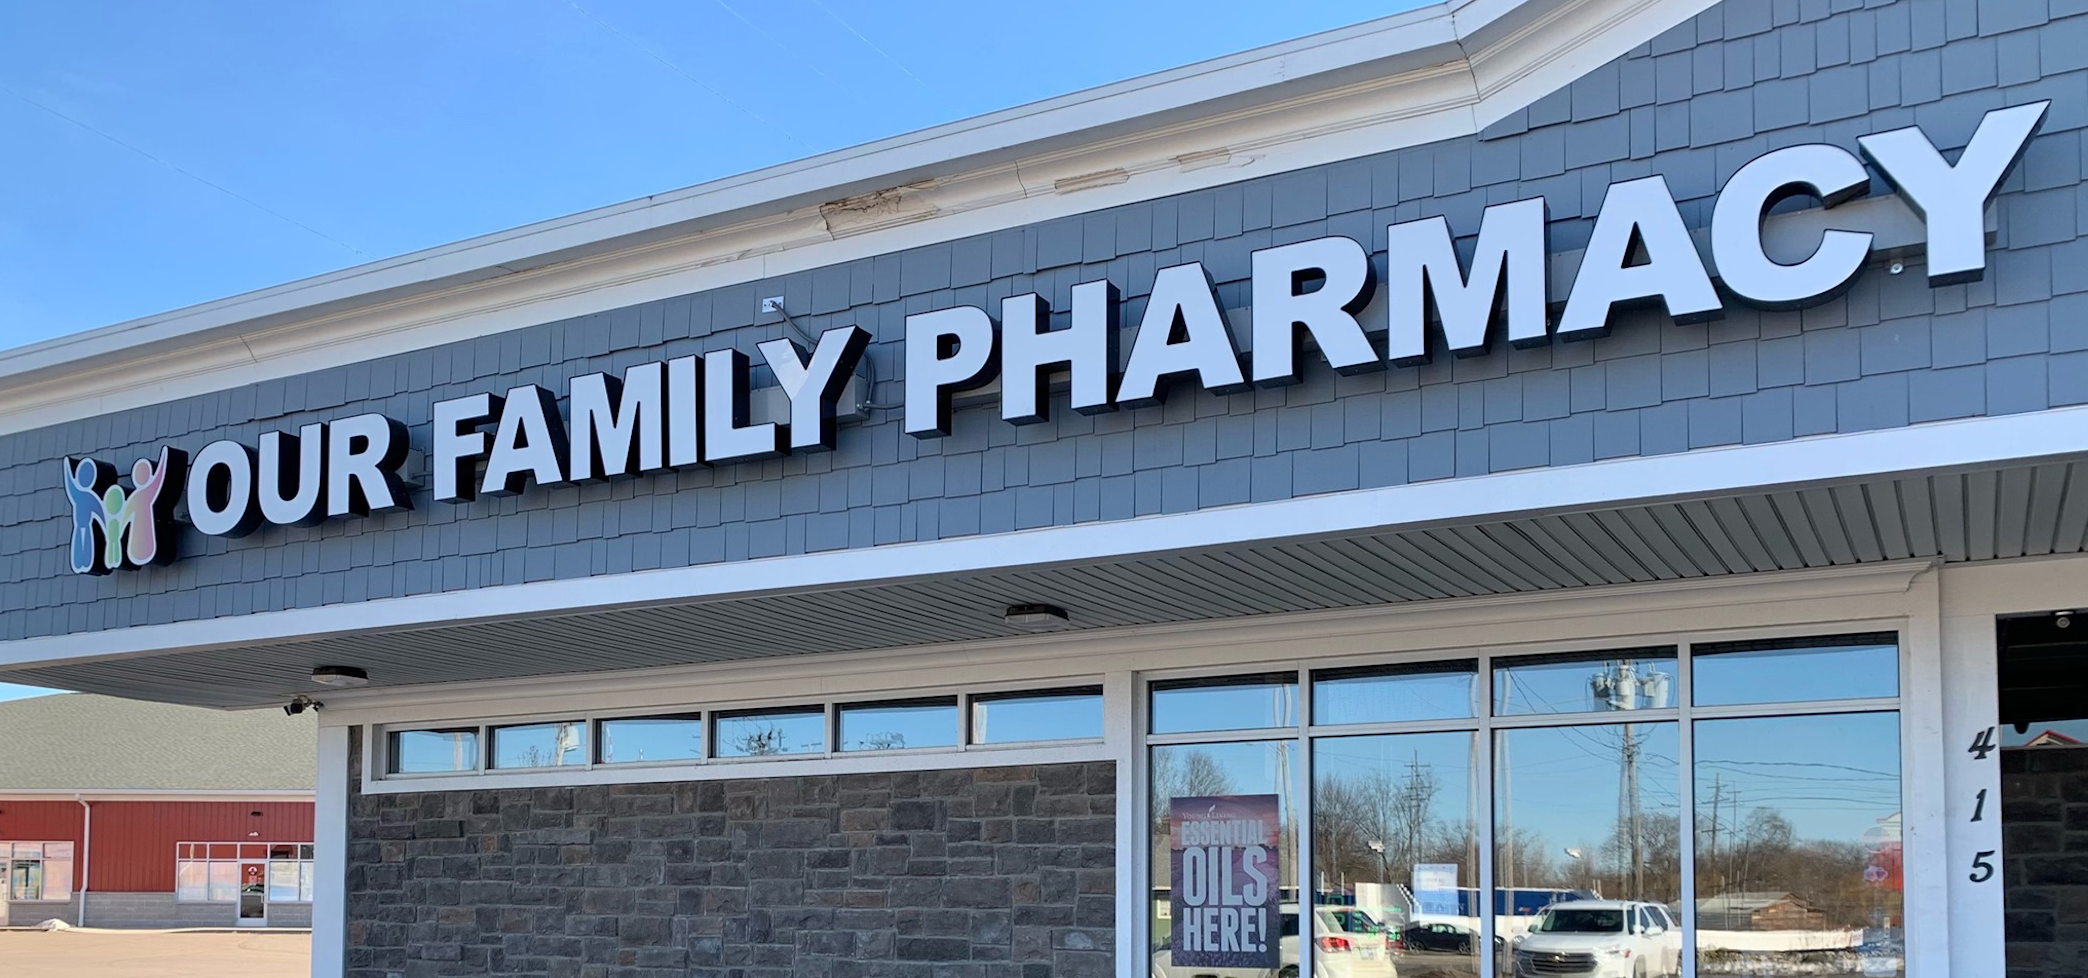 Our Family Pharmacy storefront